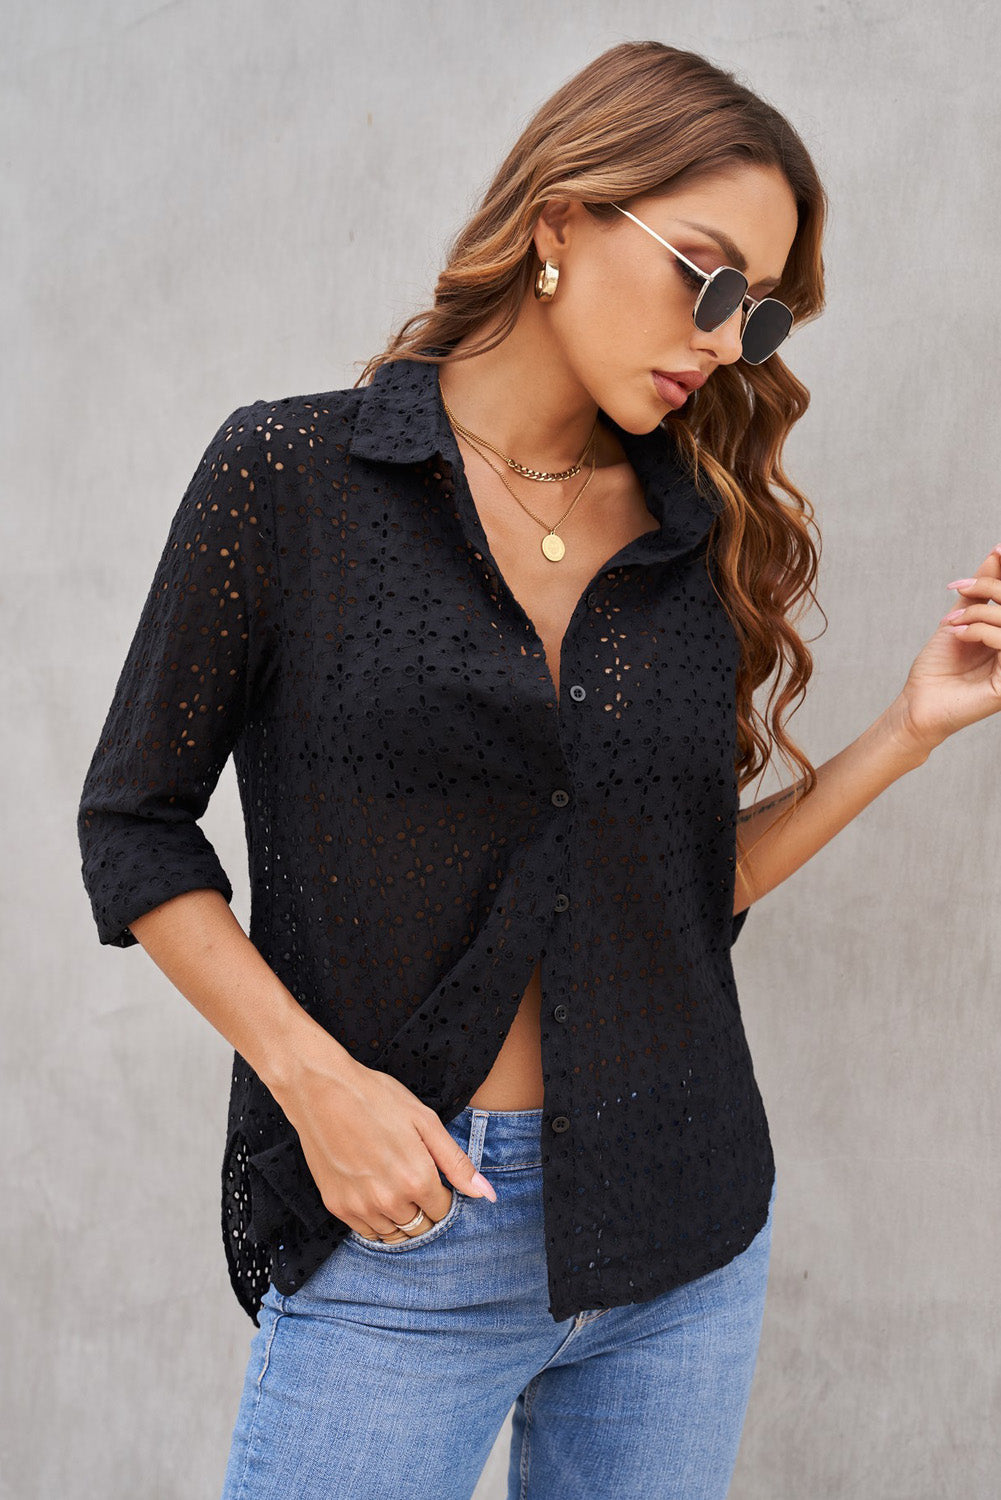 Eyelet Floral Hollow-Out Shirt - Keene's